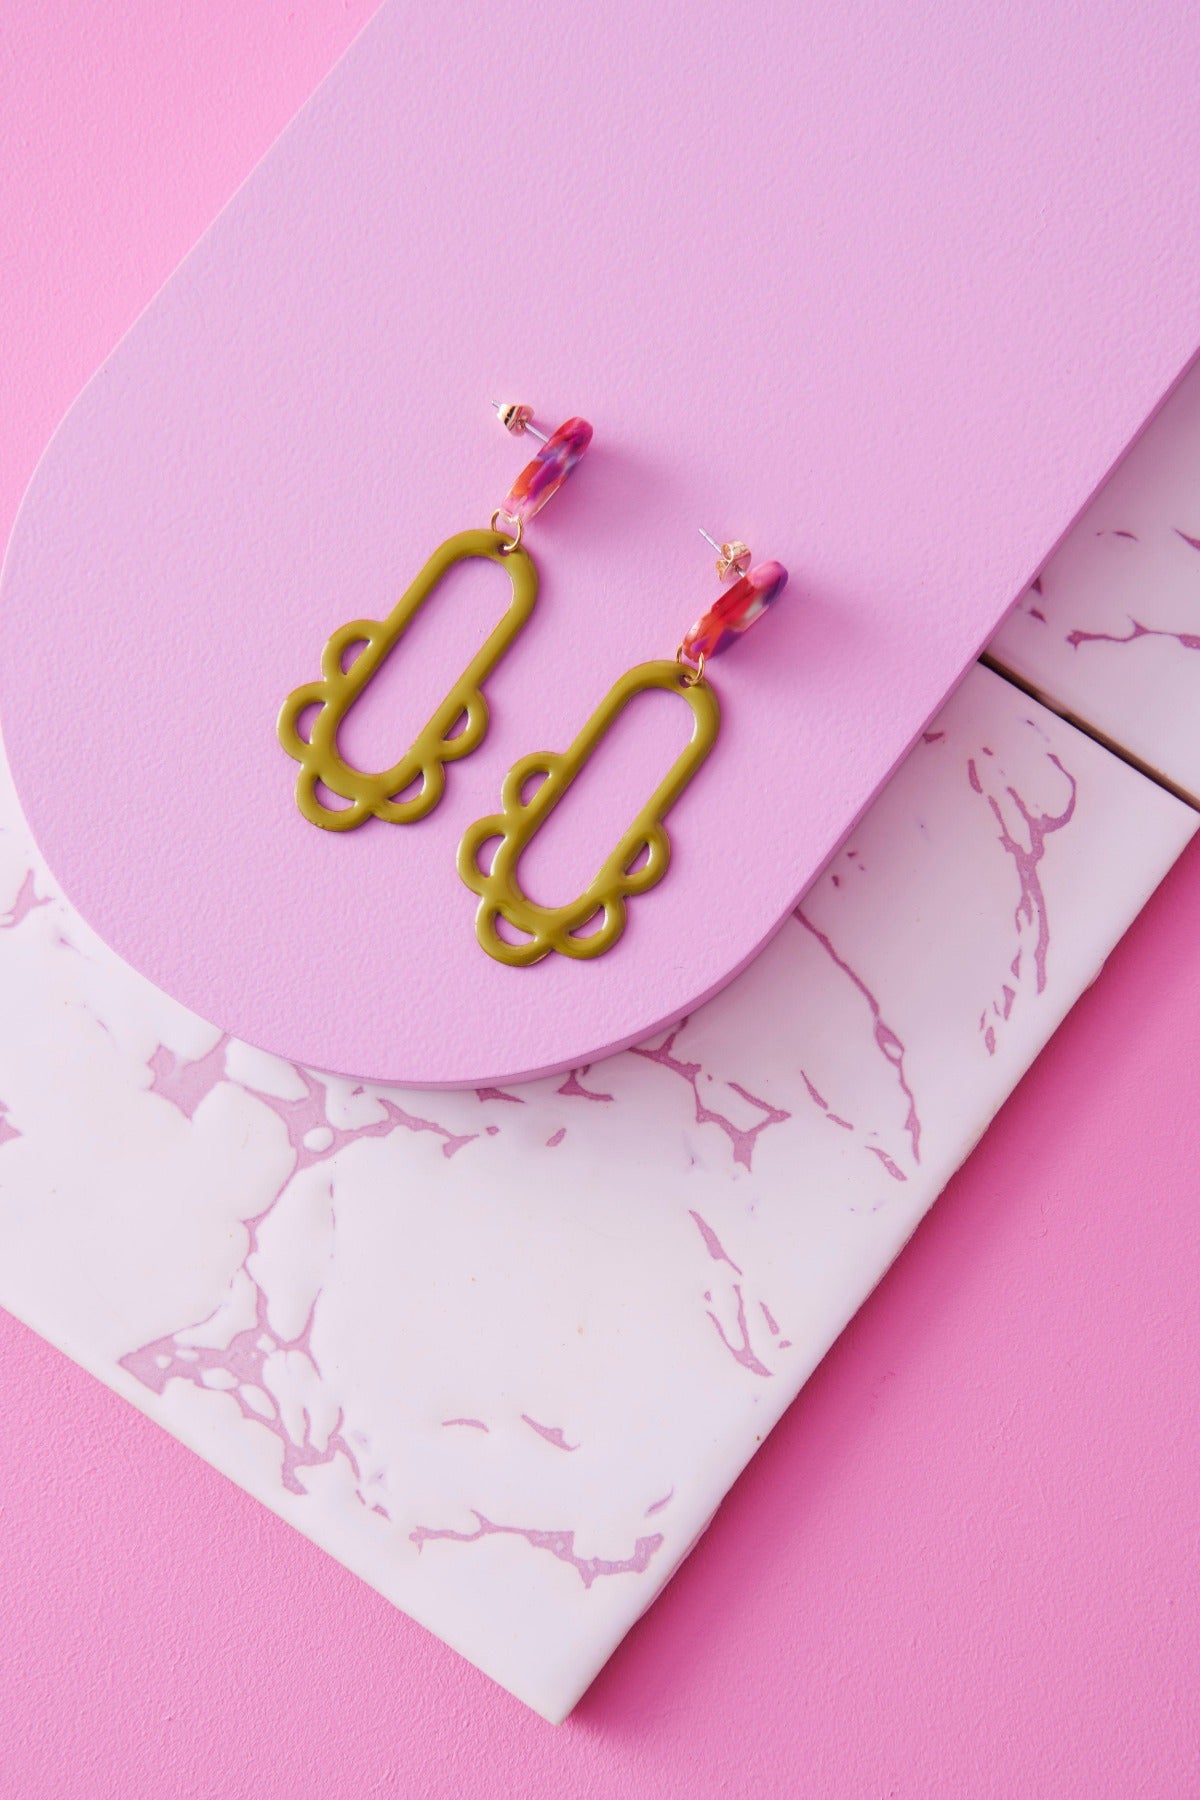 A pair of Fiesta earrings in avocado sit styled against a pink background.